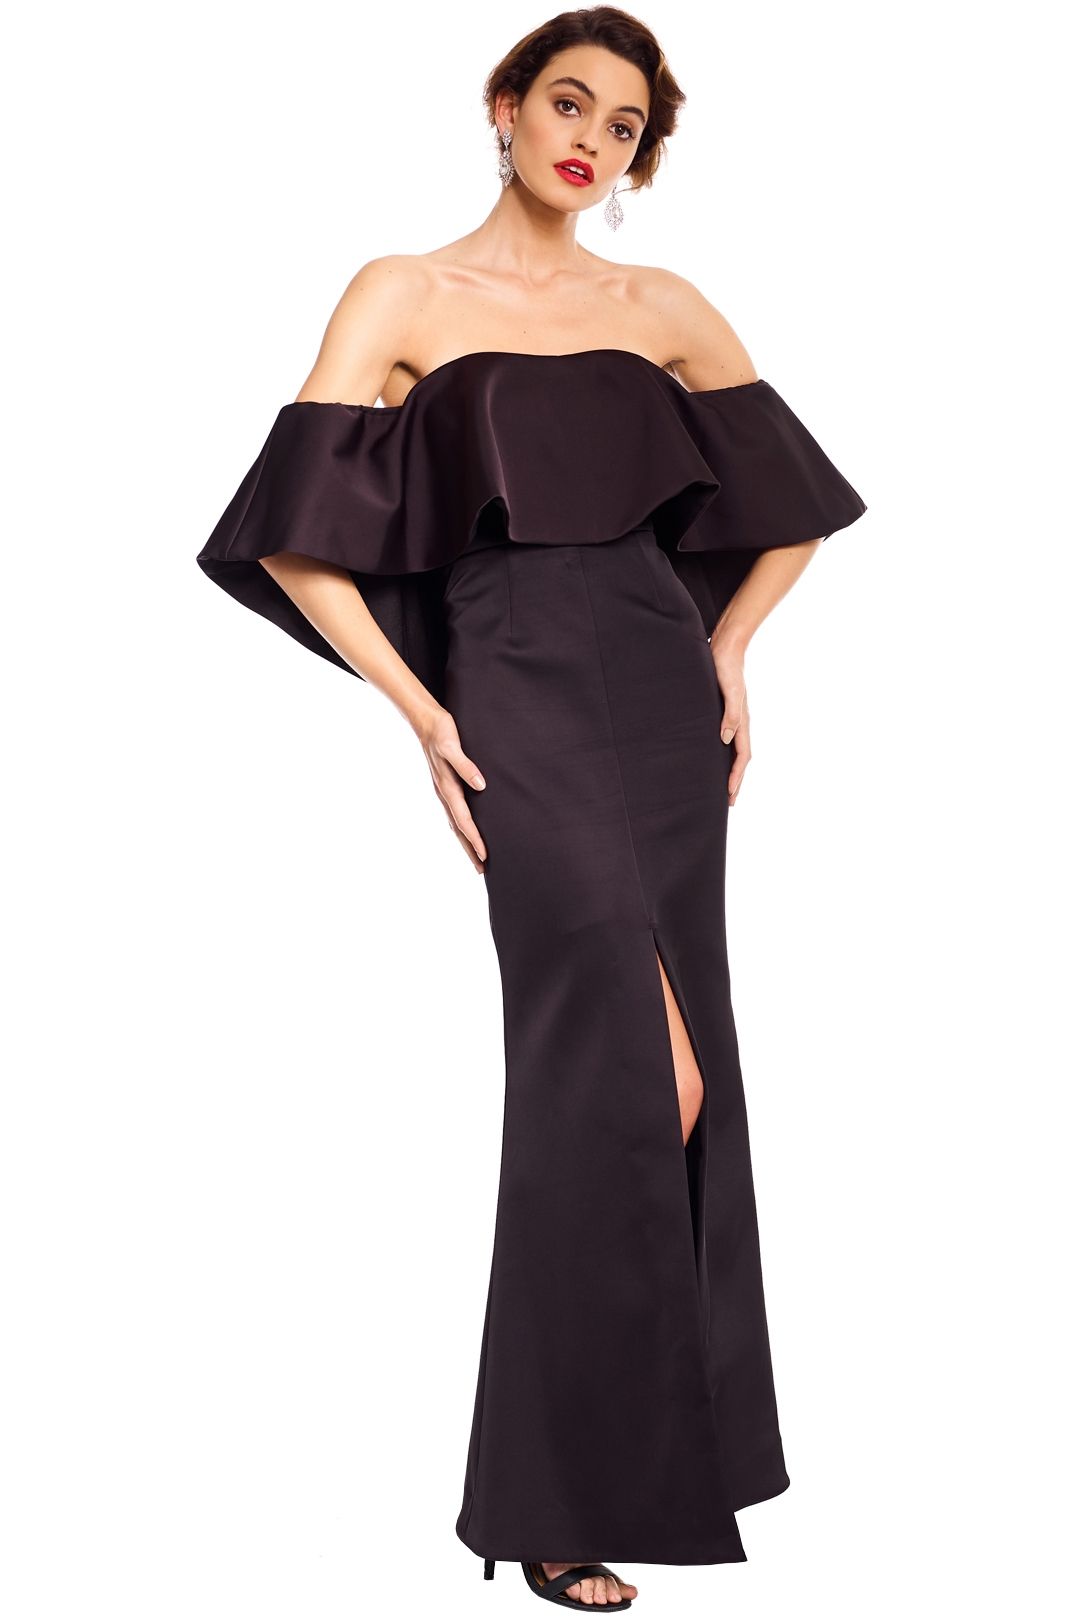 Talulah - Without You Gown - Black - Front